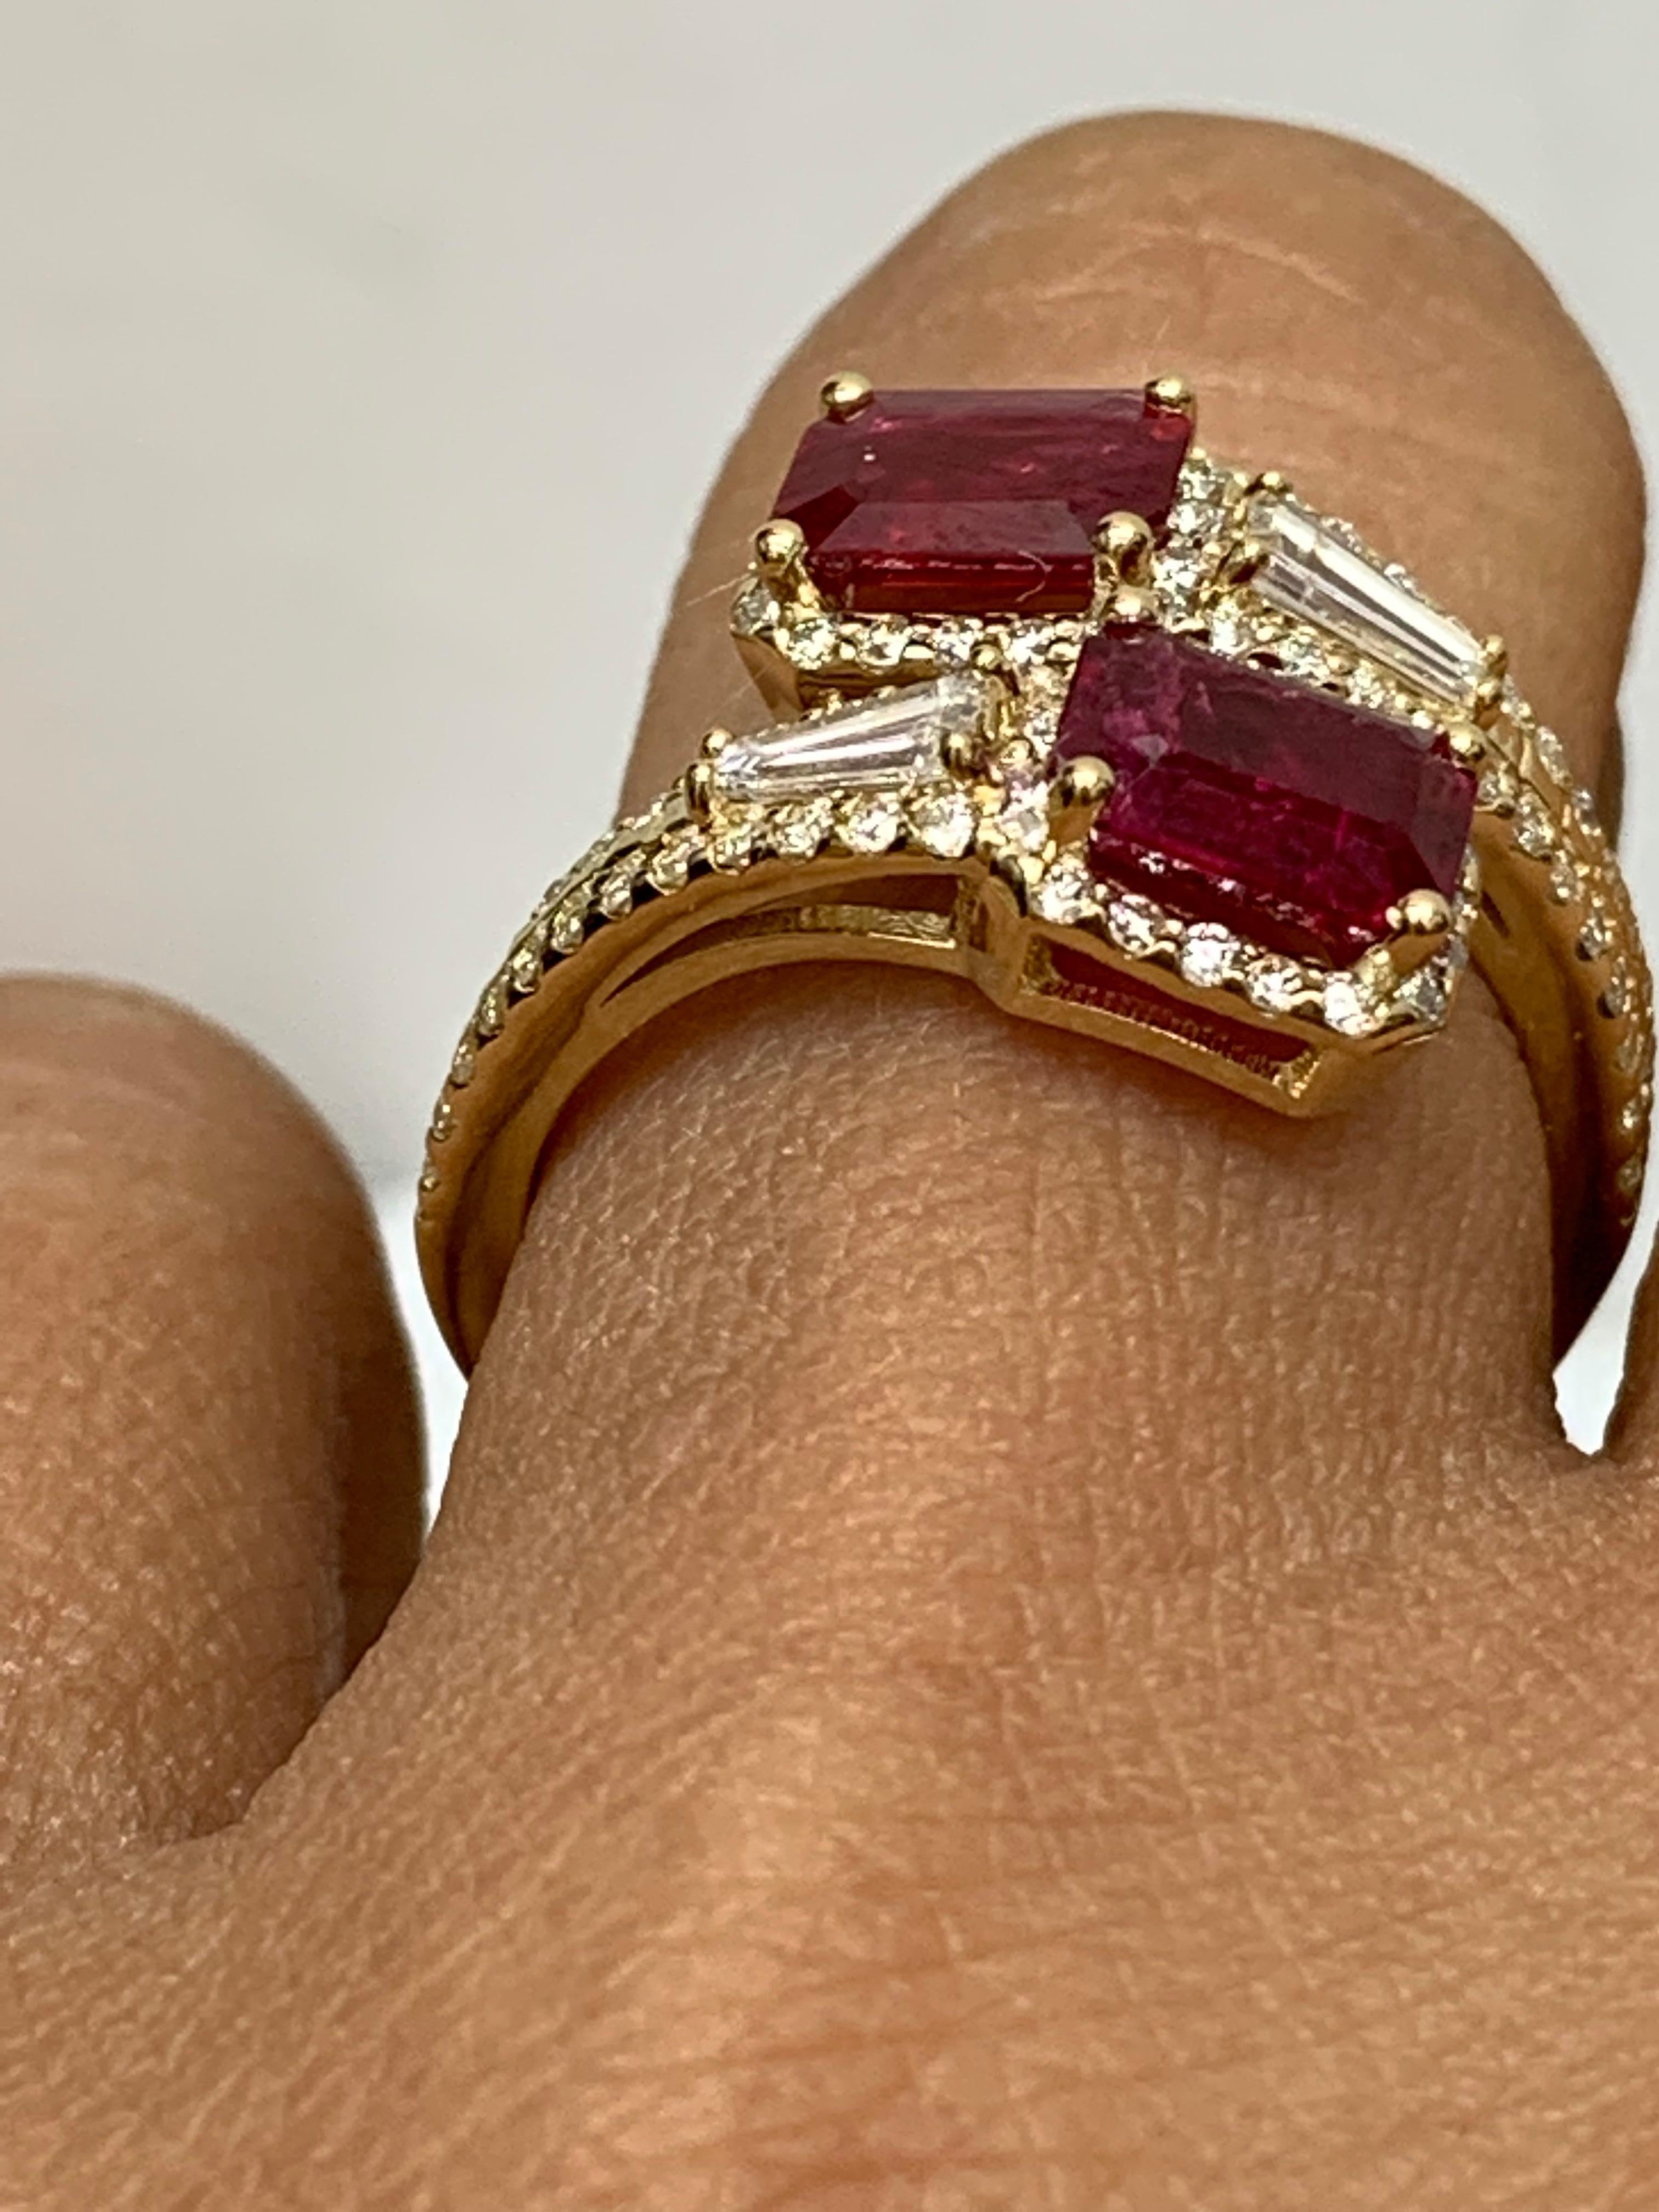 2.18 Carat Emerald Cut Ruby Diamond Toi et Moi Engagement Ring 14K Yellow Gold For Sale 3